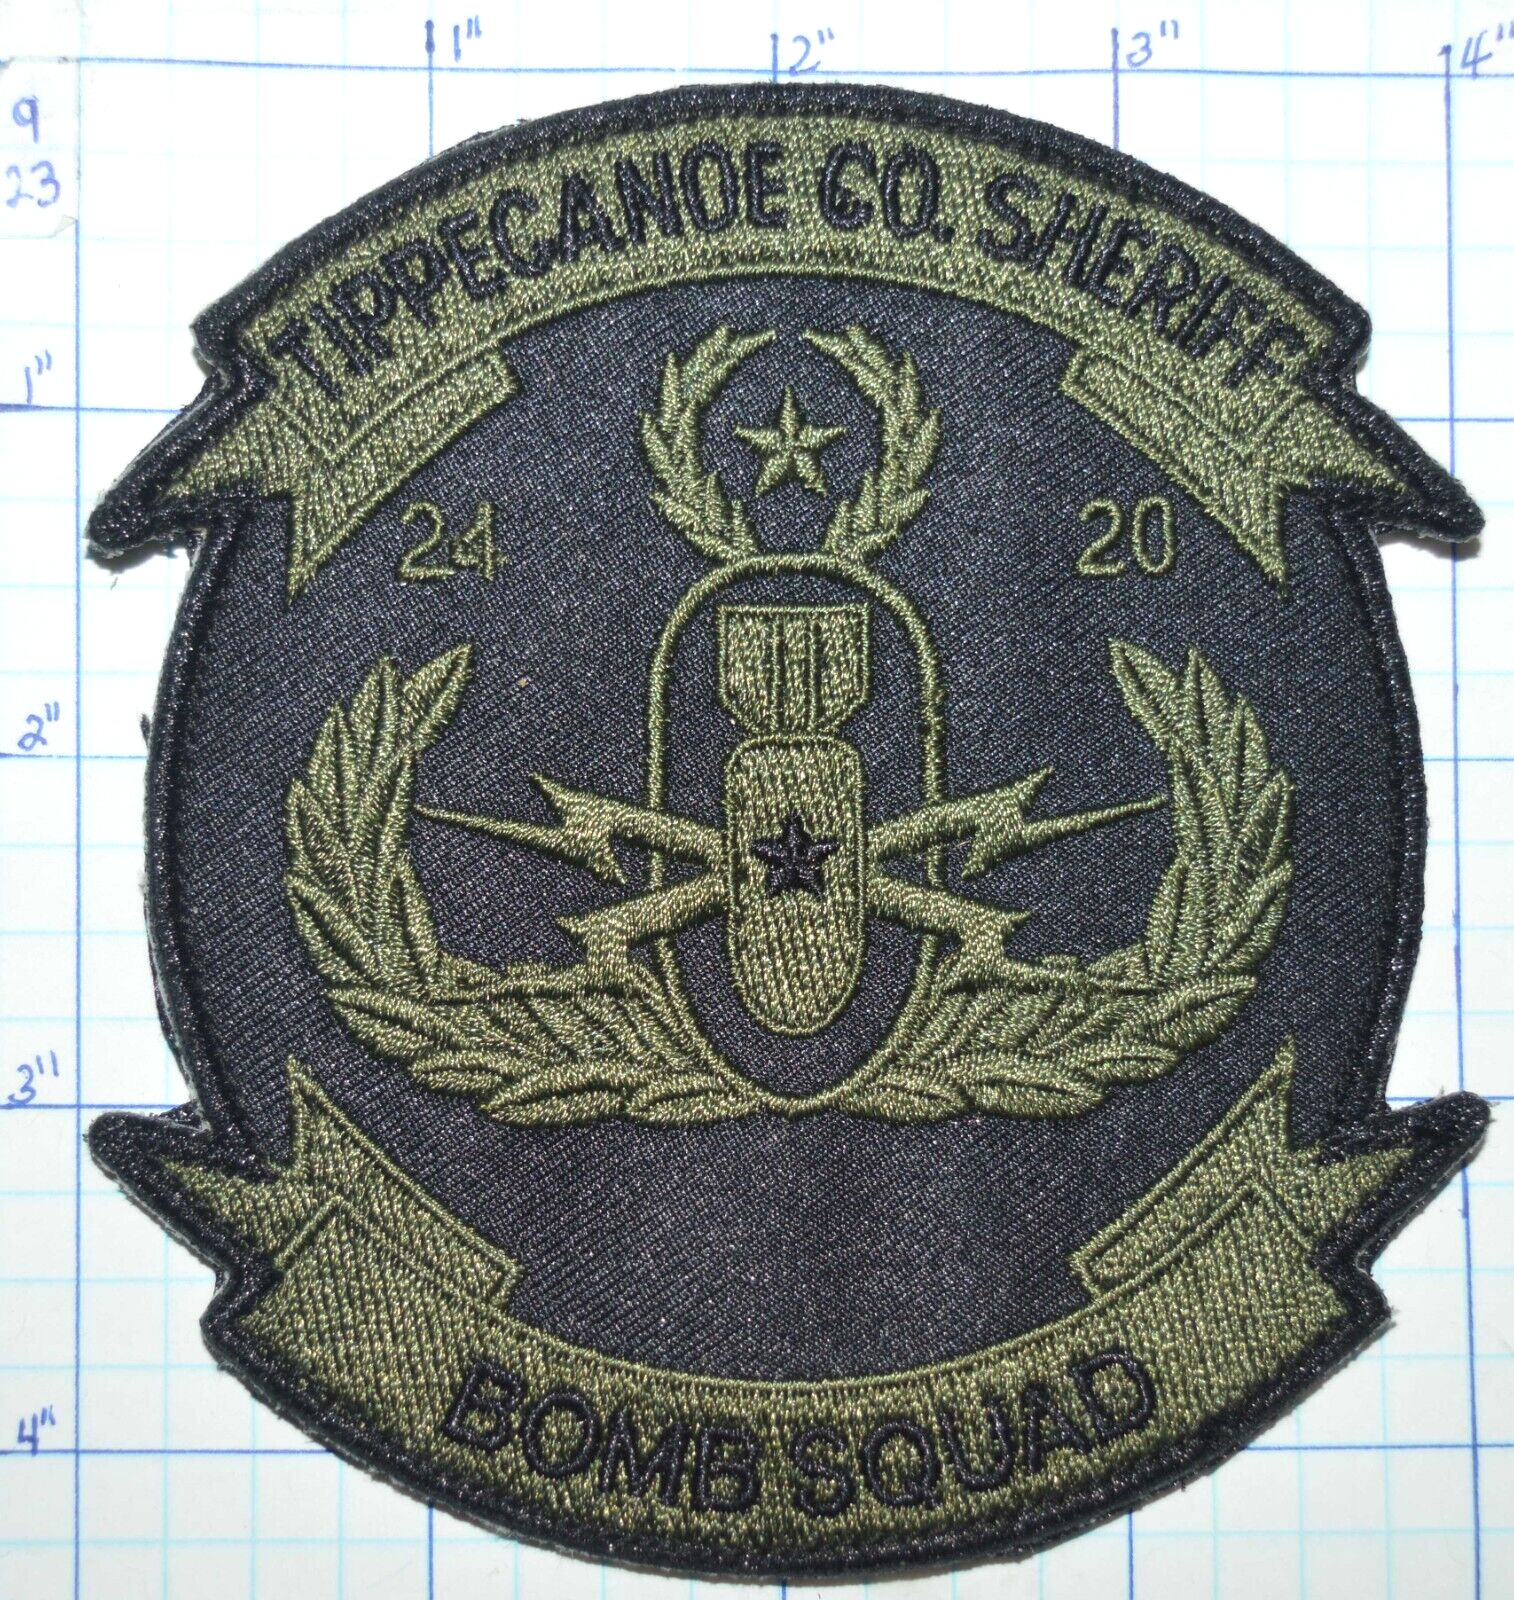 INDIANA, TIPPECANOE COUNTY SHERIFF BOMB SQUAD SUBDUED HOOK & LOOP BACK PATCH